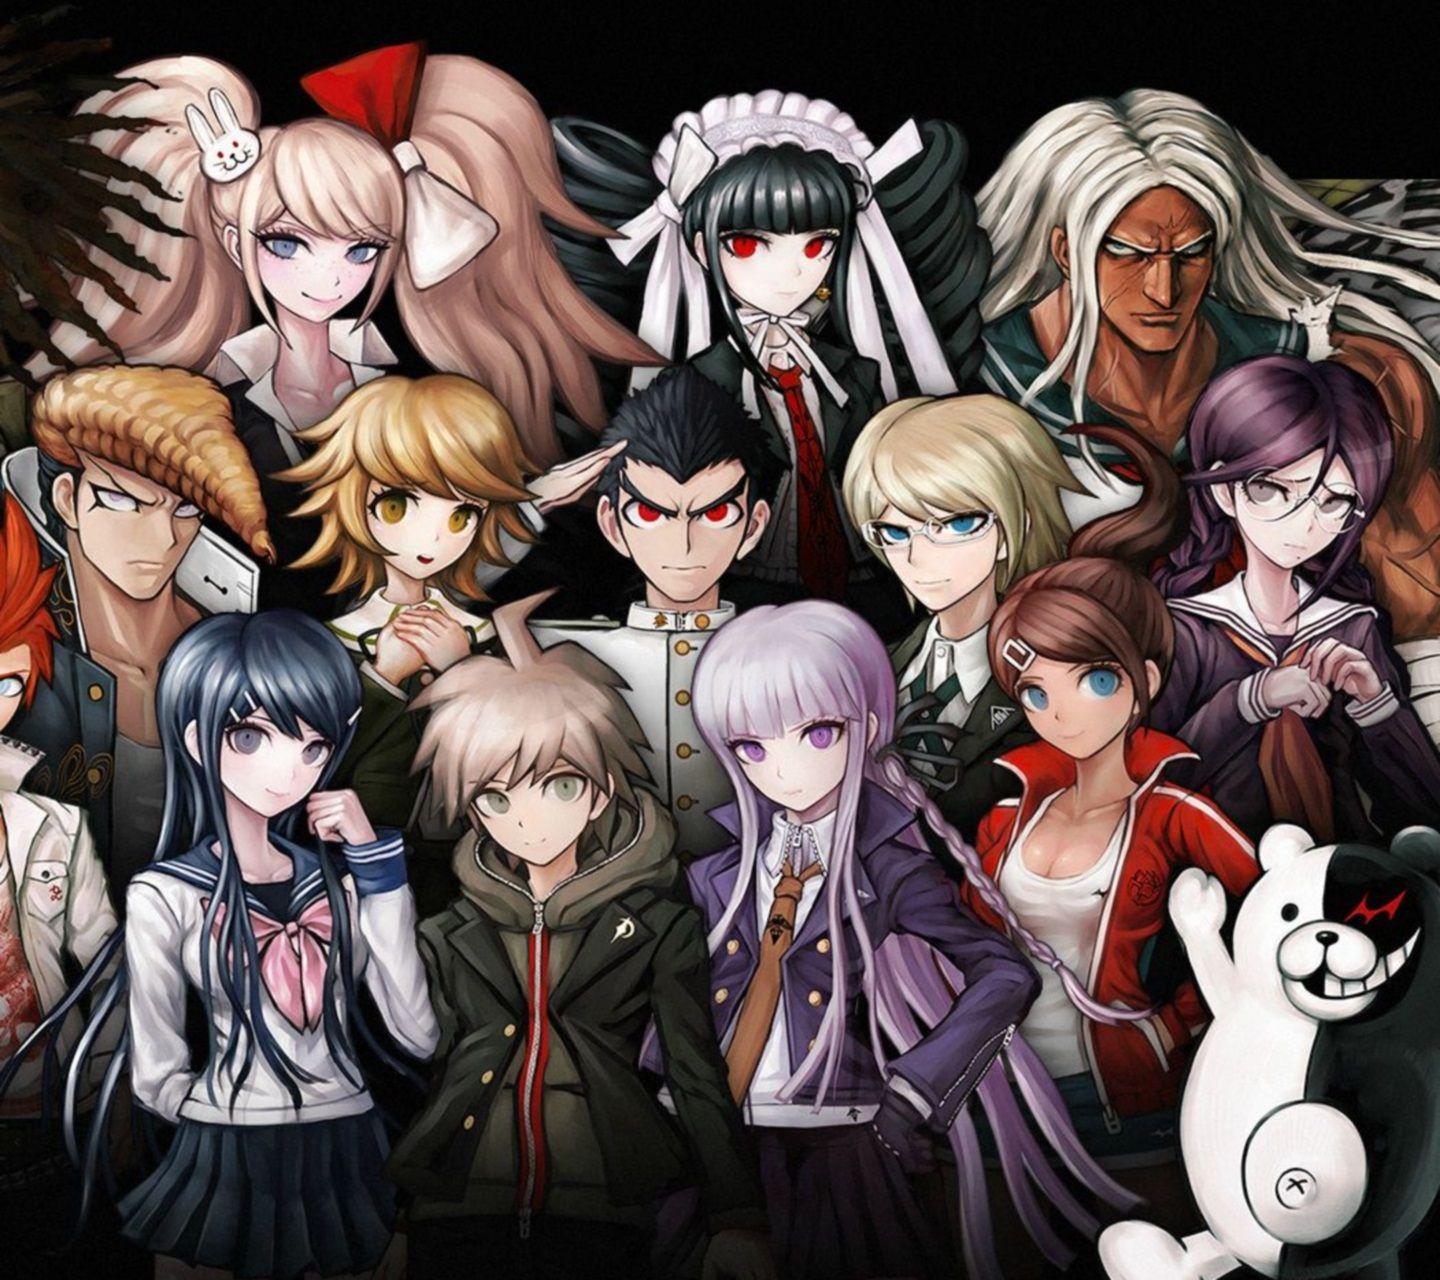 Danganronpa: Trigger Happy Havoc mobile wallpapers for iPhone and